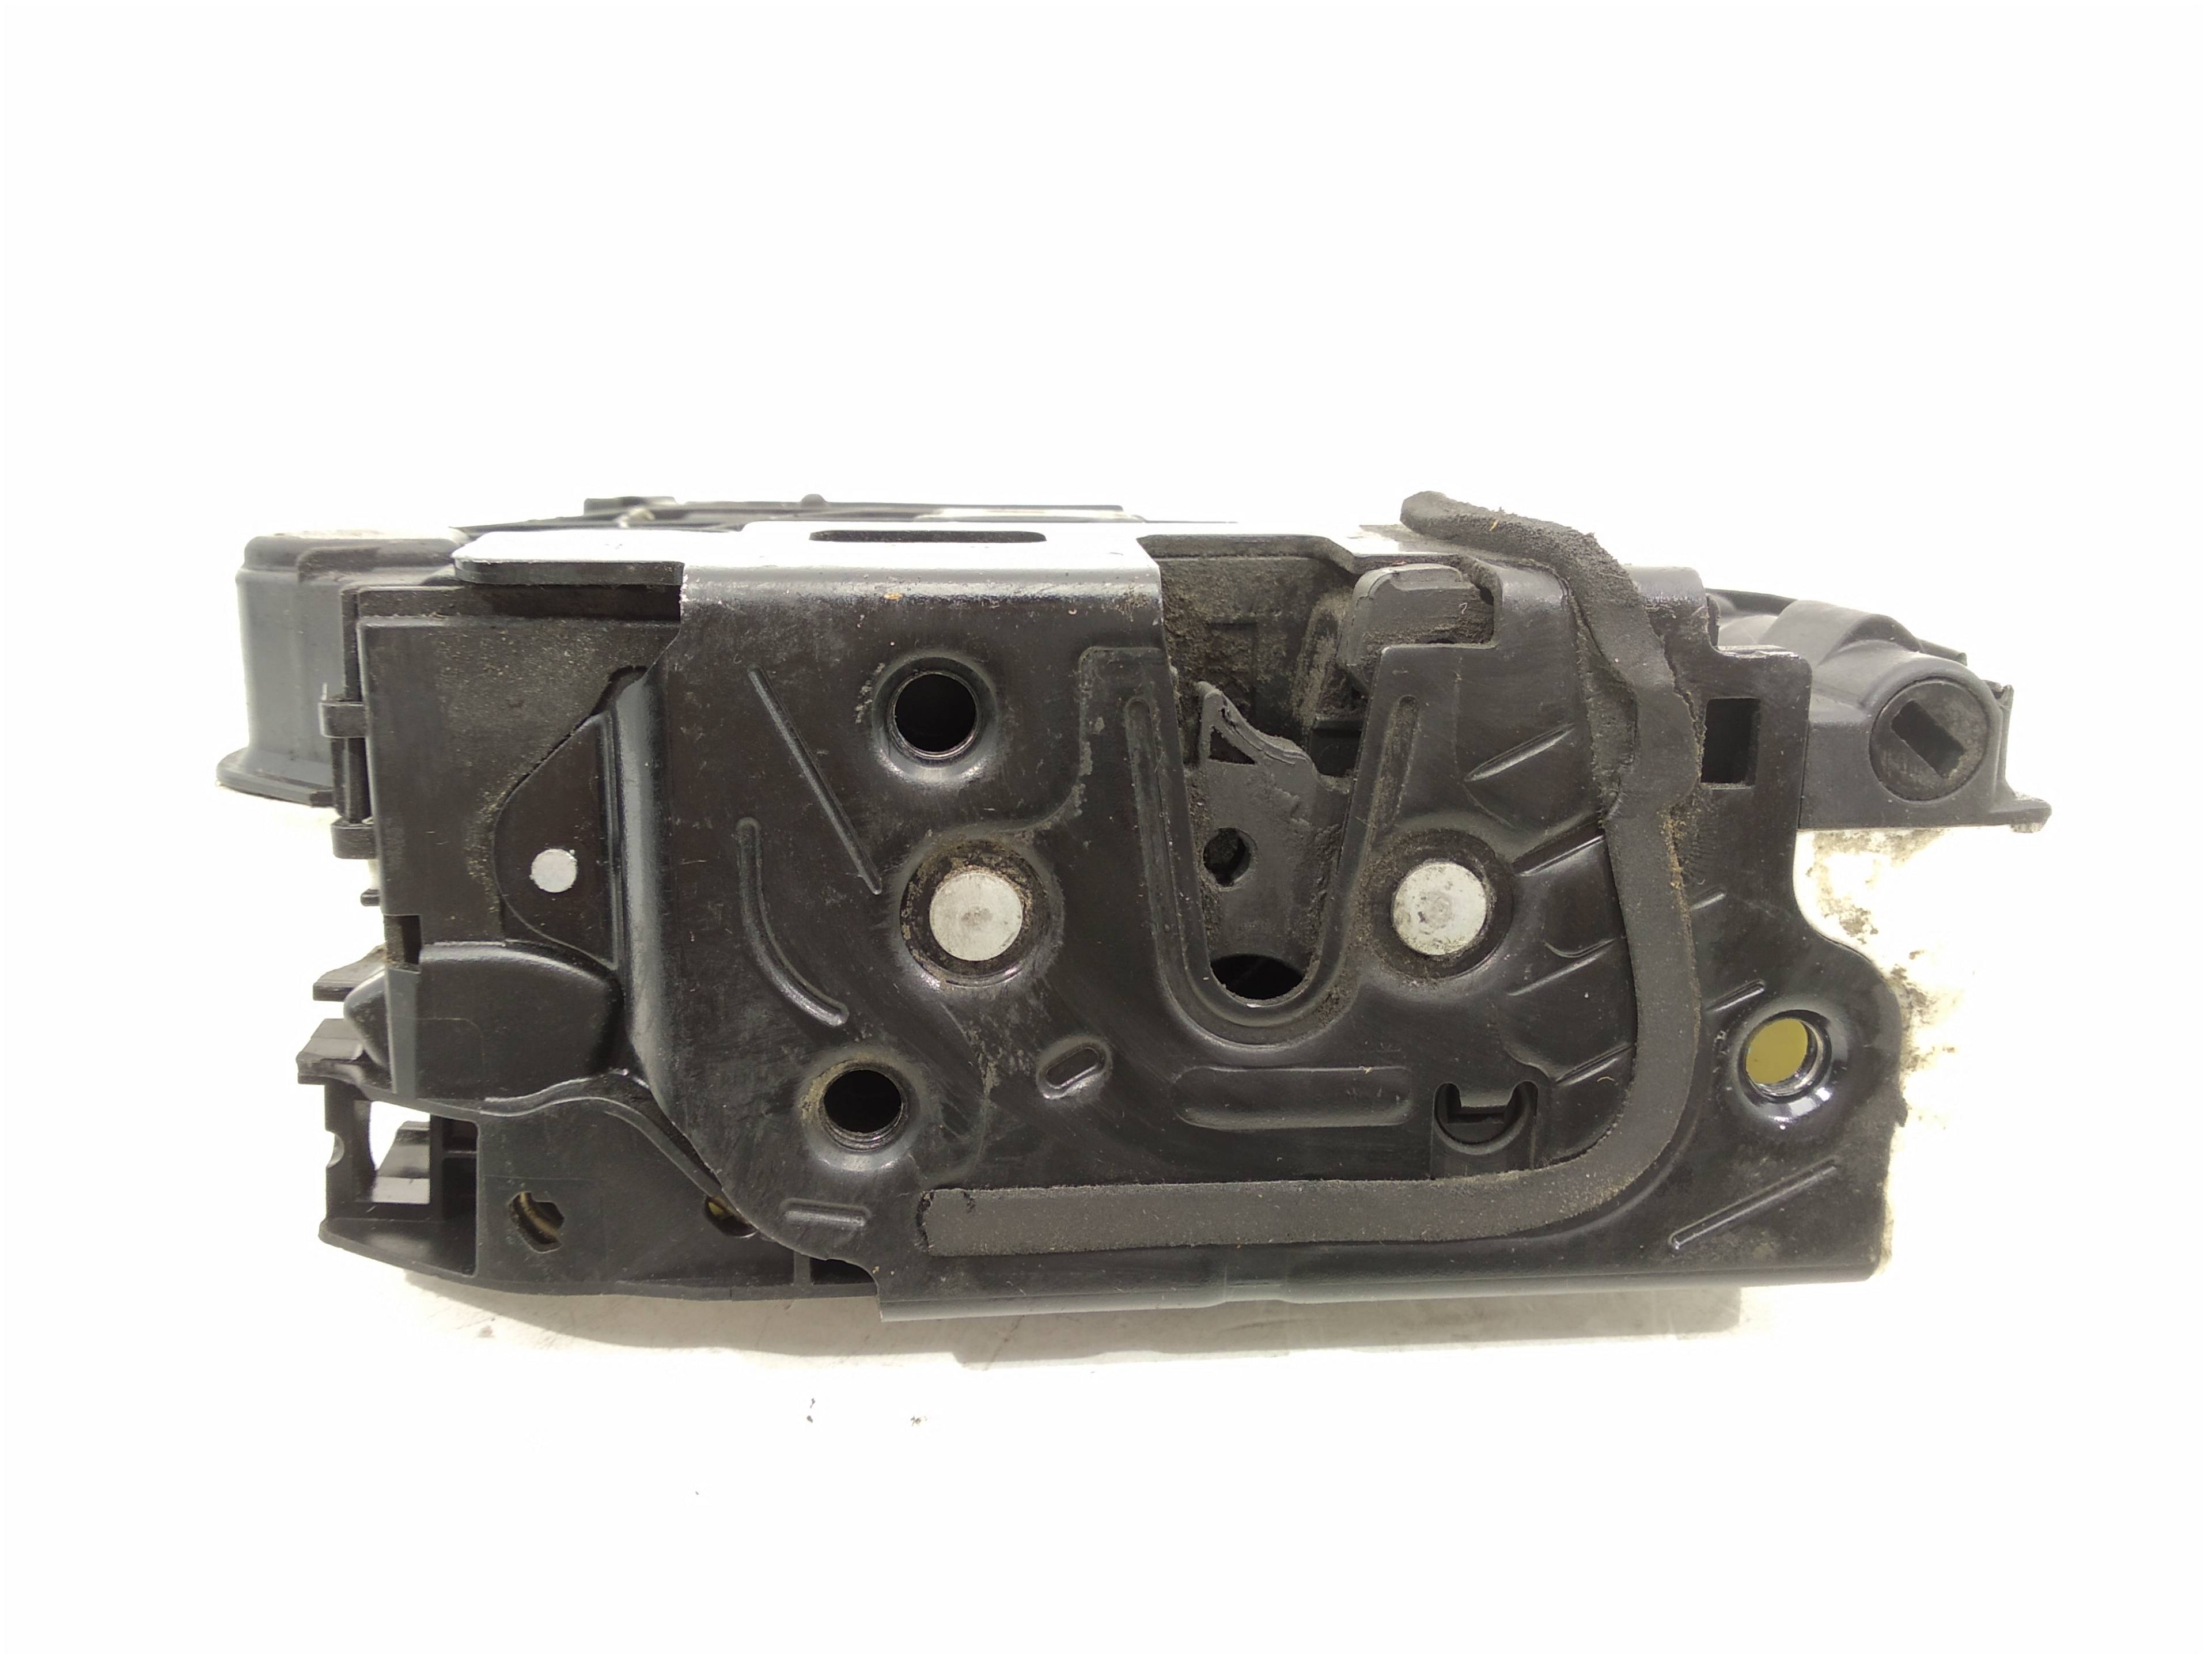 SEAT Ibiza 4 generation (2008-2017) Front Right Door Lock 5N1837016A, 5N1837016A 19318832